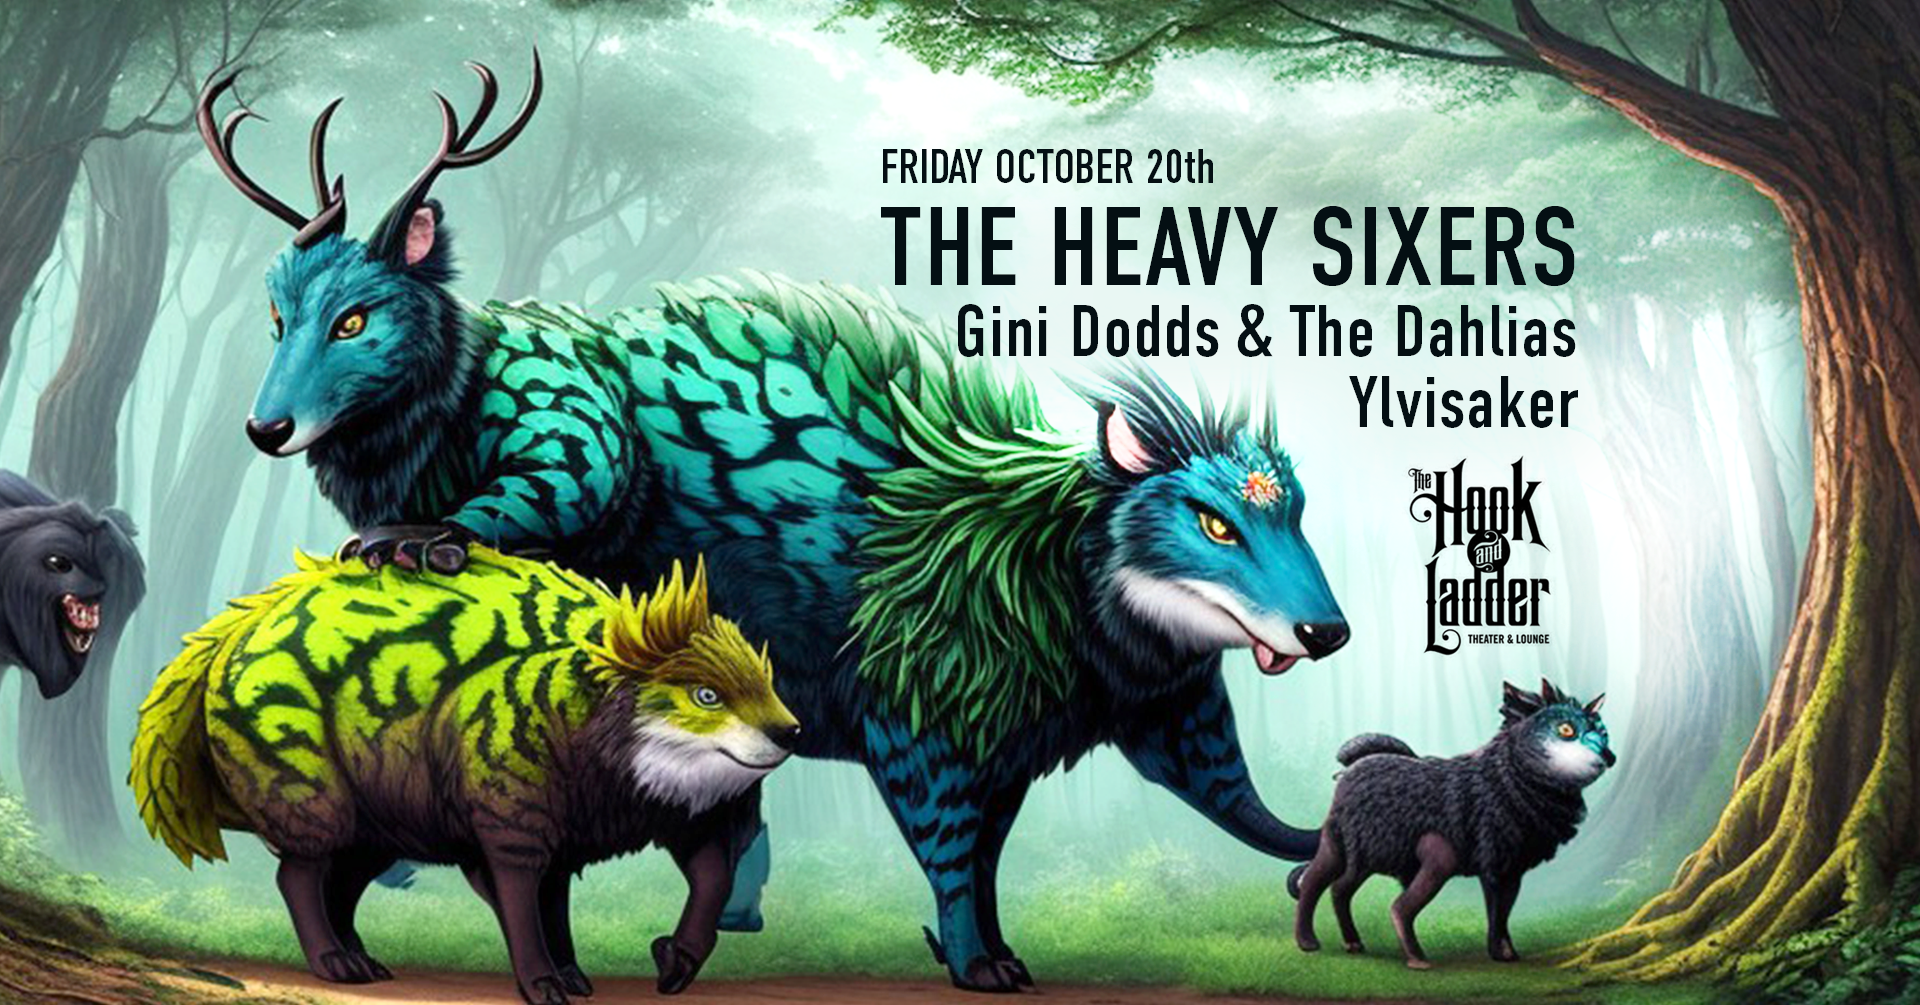 The Heavy Sixers, Gini Dodds and the Dahlias, & Ylvisaker Friday October 20 Mission Room at The Hook Doors 7:30pm :: Music 8:00pm :: 21+ General Admission * $12 ADV / $15 DOS * Does not include fees NO REFUNDS